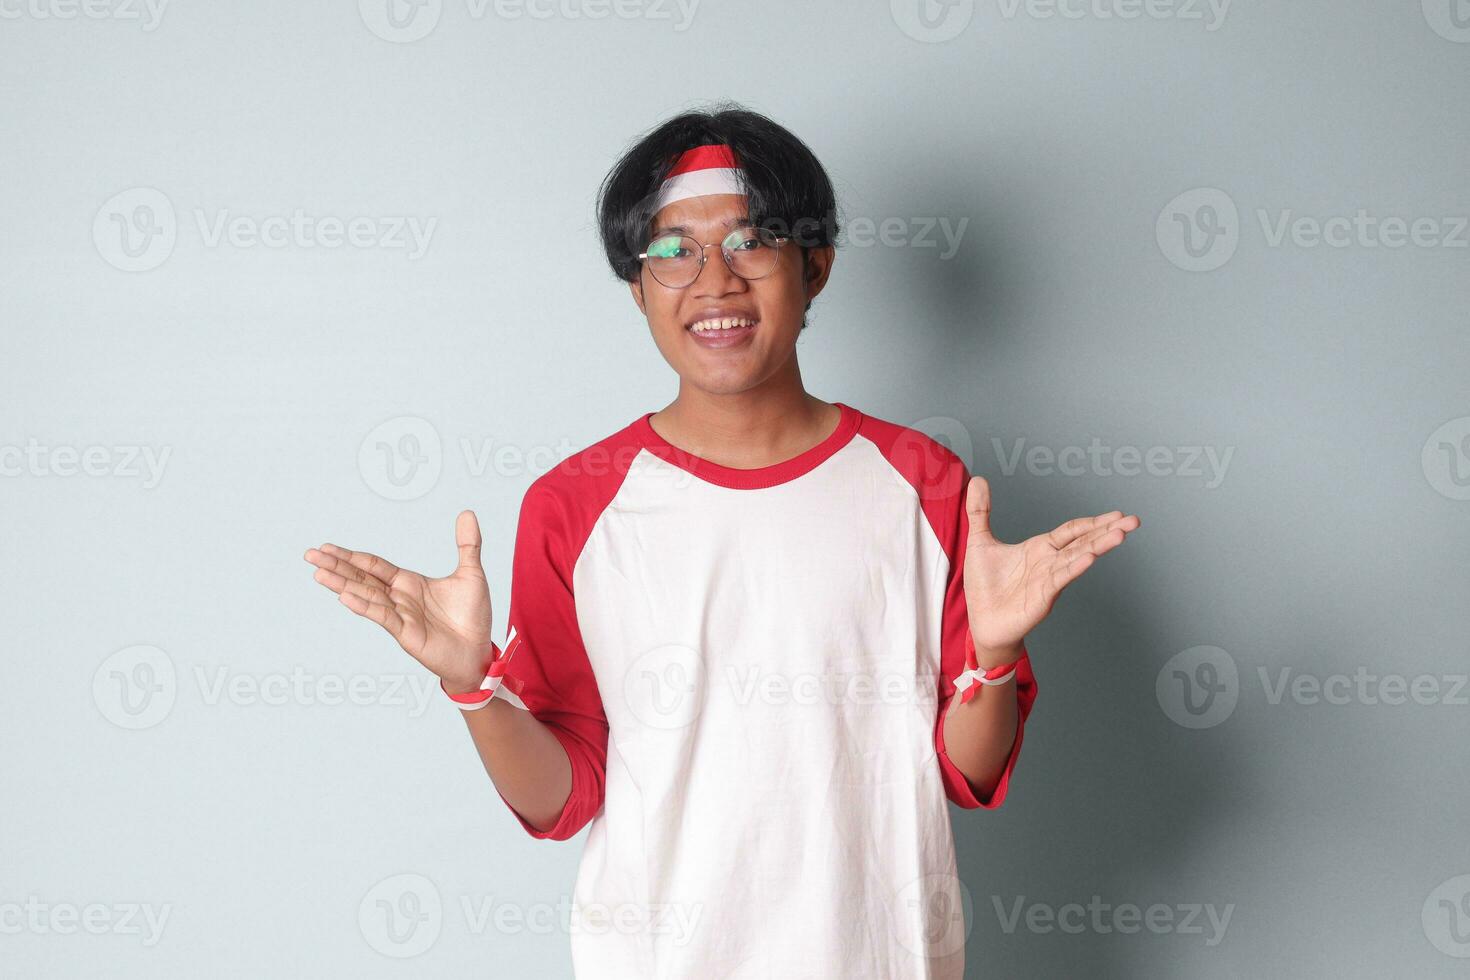 Portrait of attractive Asian man in t-shirt with red and white ribbon on head, pulling hands towards camera, inviting someone to come inside, welcoming gesture. Isolated image on gray background photo